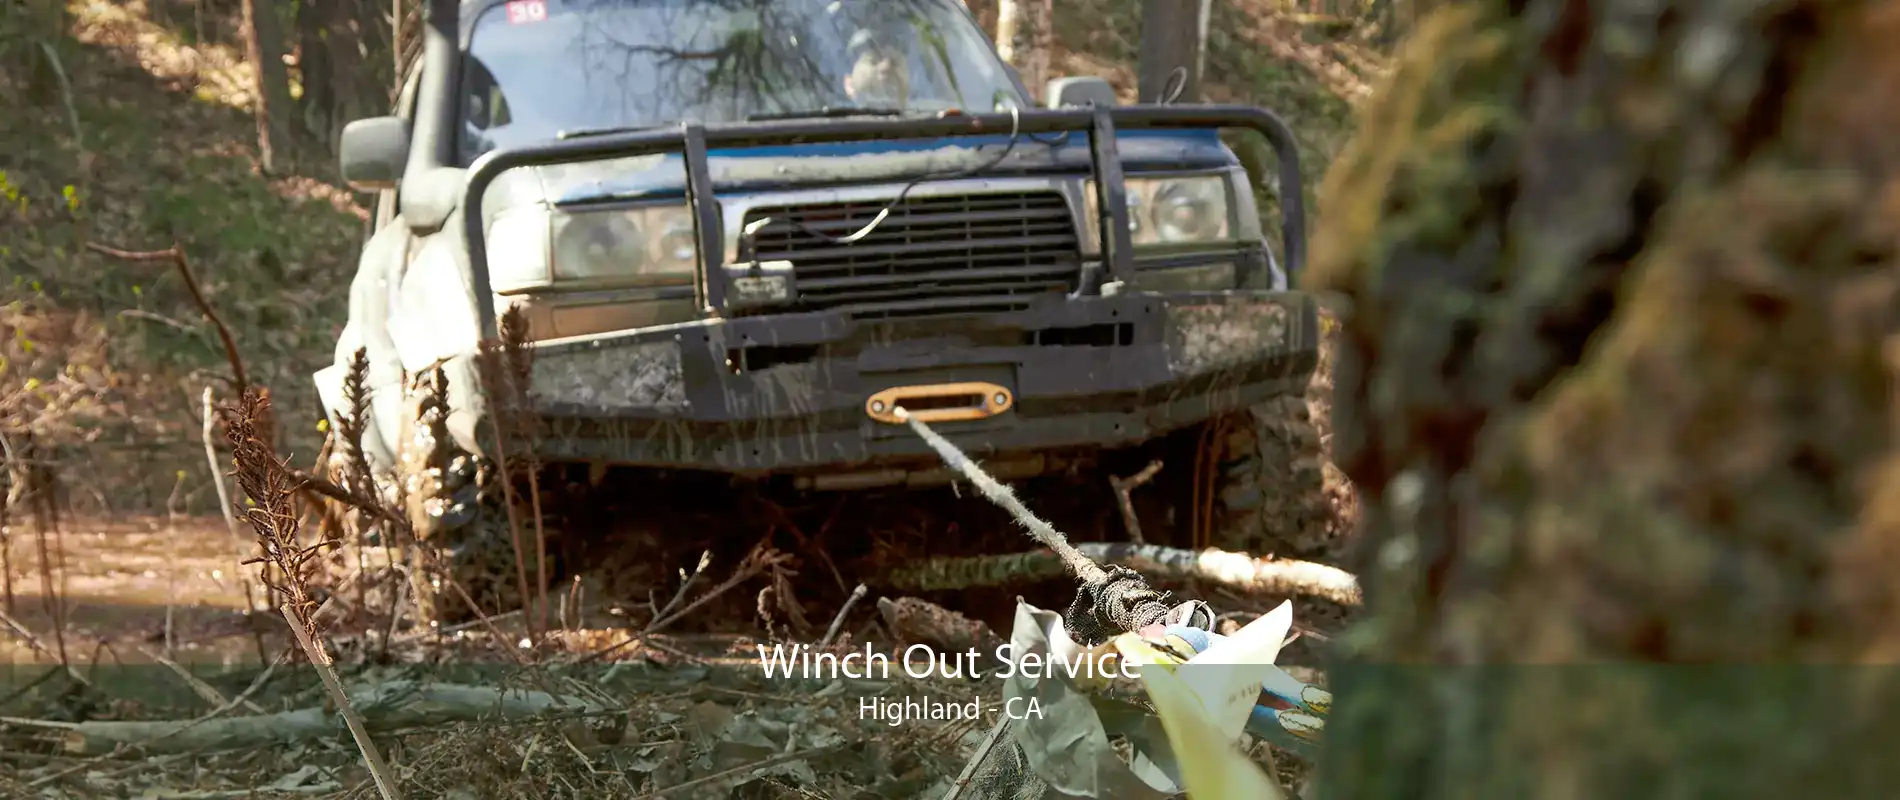 Winch Out Service Highland - CA